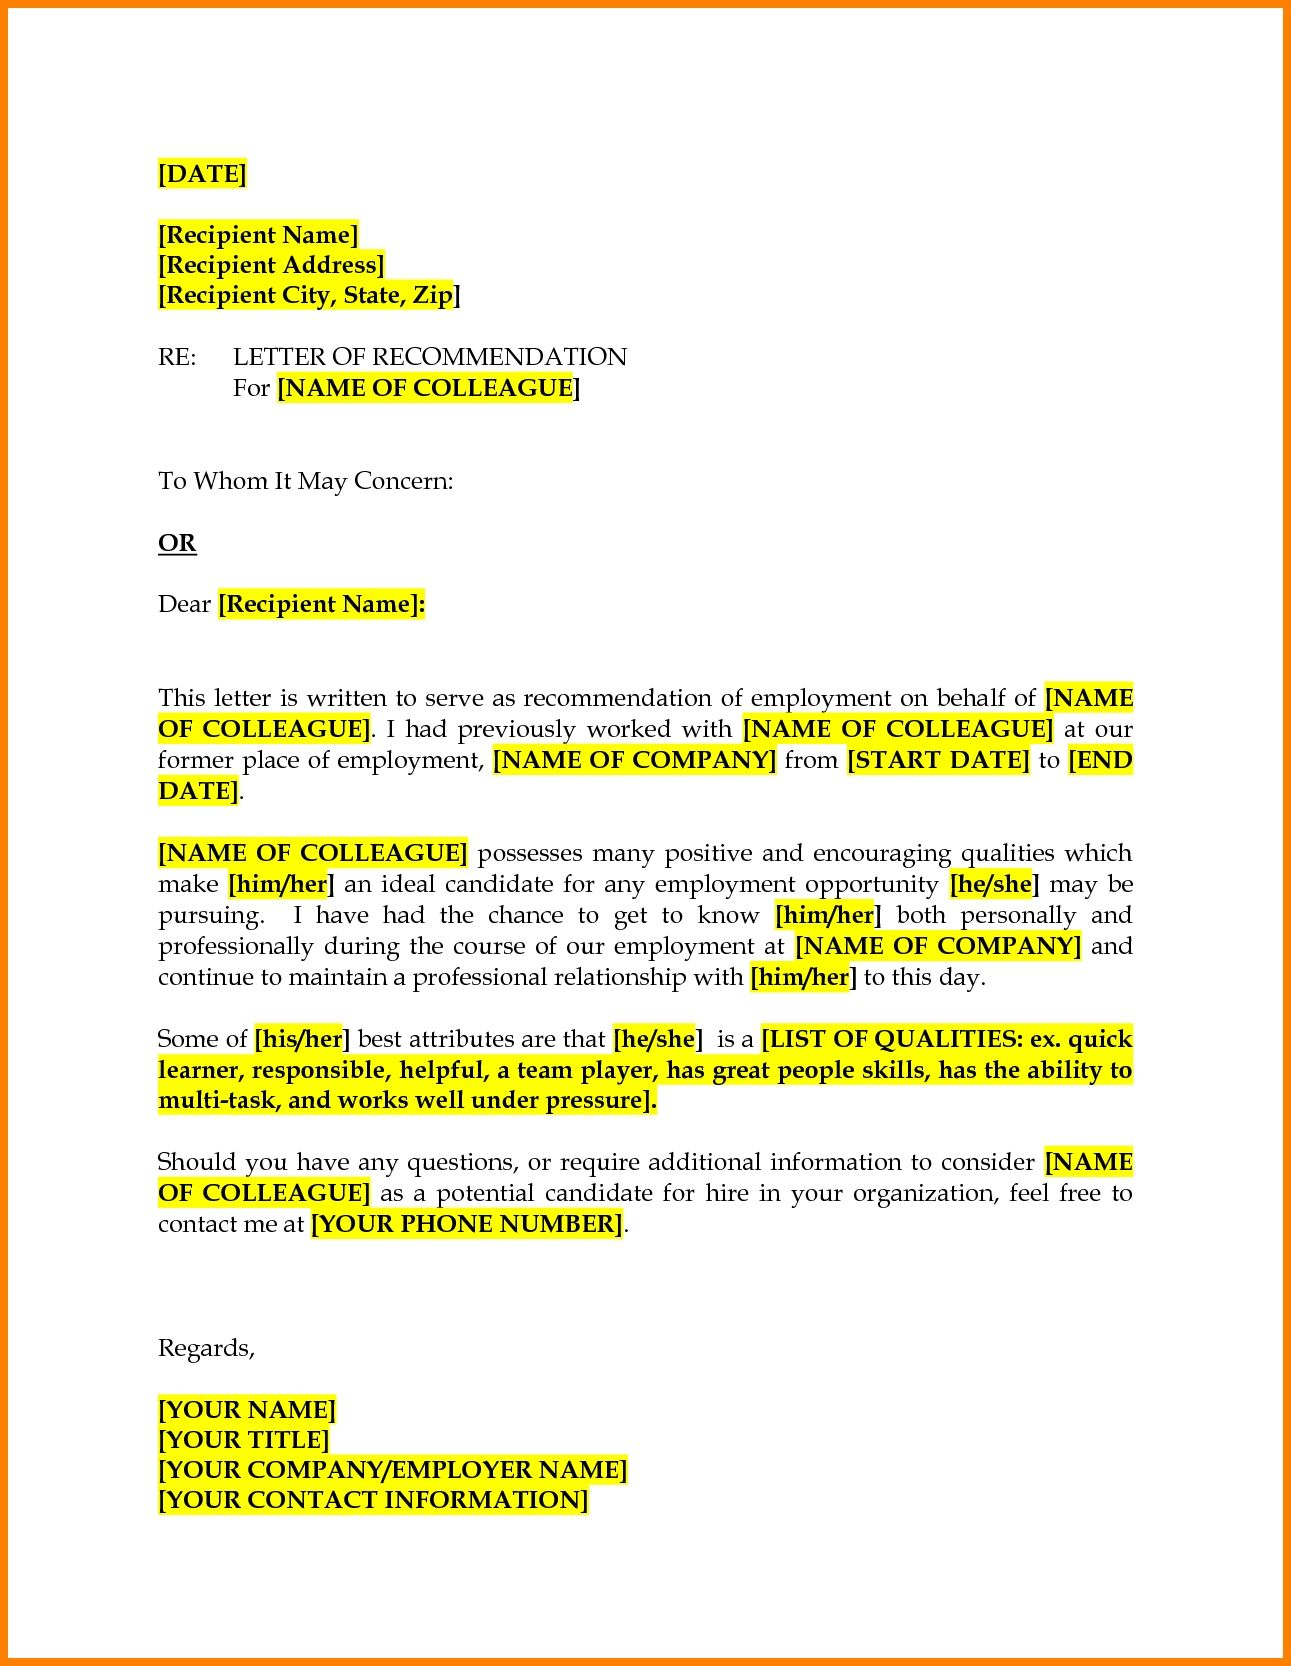 Colleague Recommendation Letter Barebearsbackyardco With for dimensions 1291 X 1666